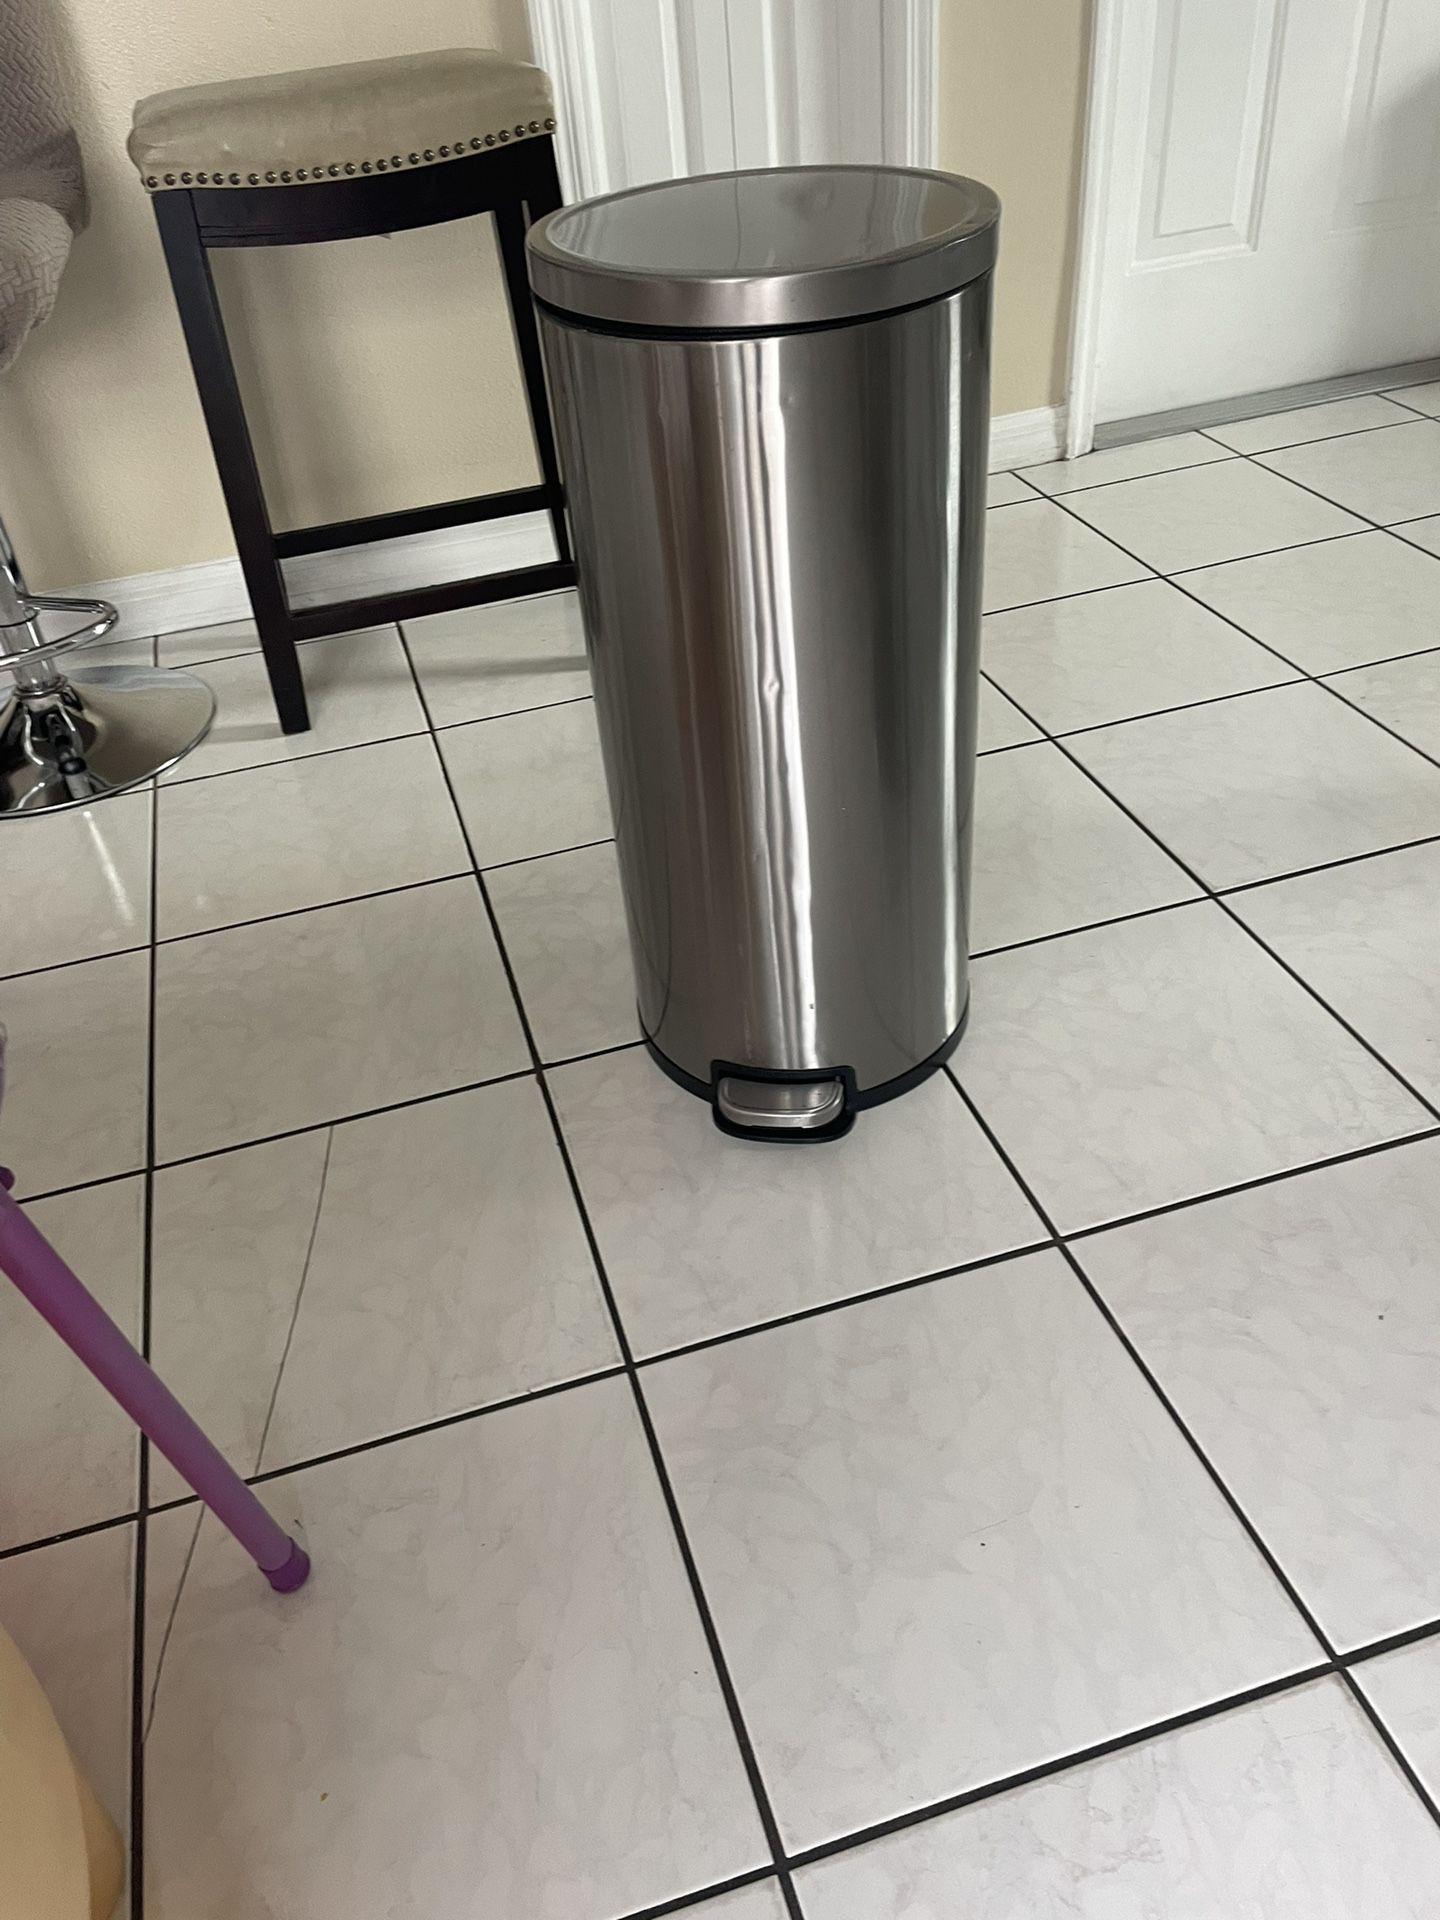 style steel trash can very good foot operated very clean measures tall 261/2 inches